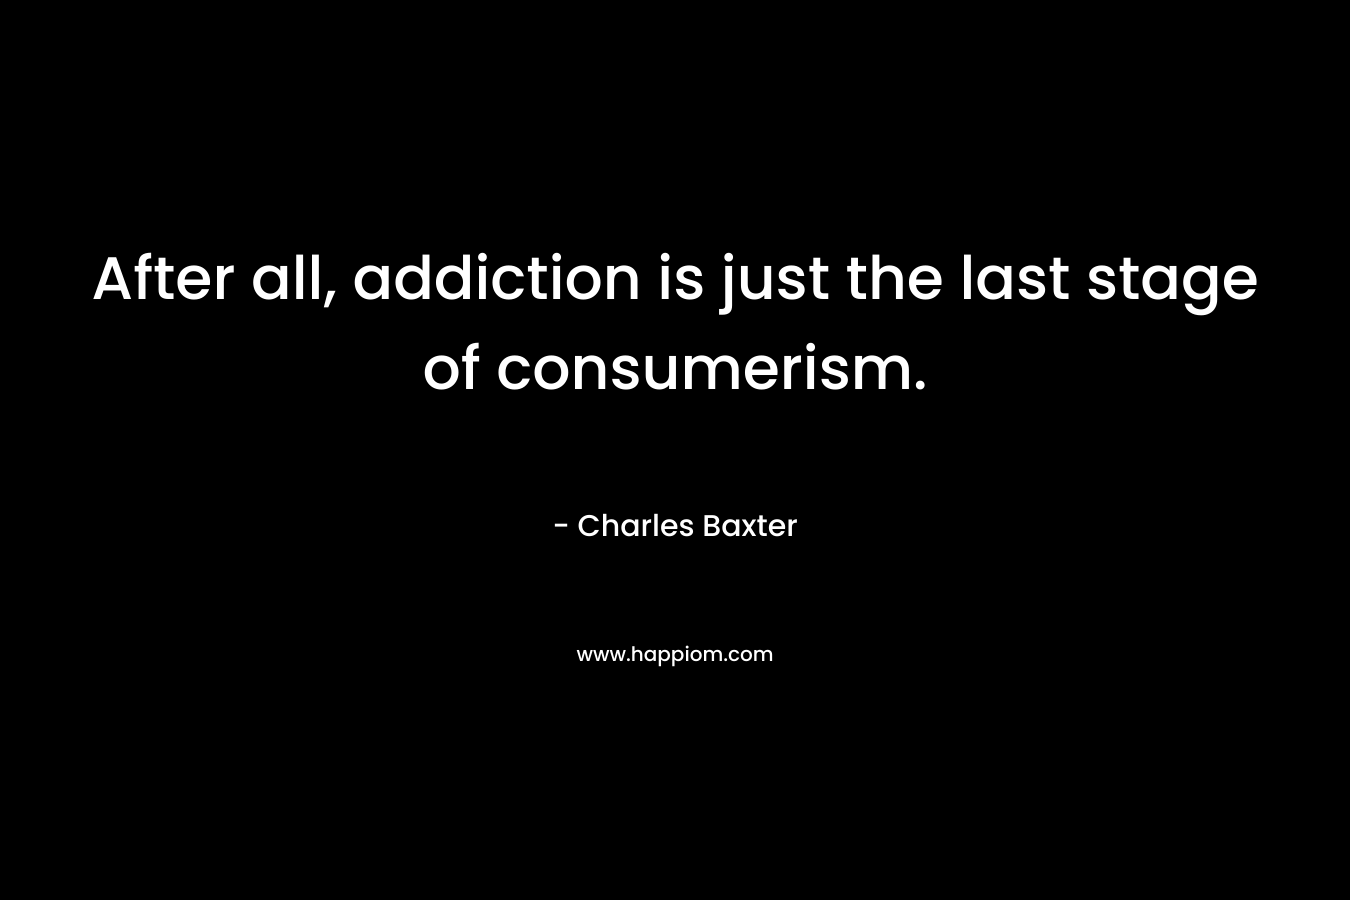 After all, addiction is just the last stage of consumerism. – Charles Baxter